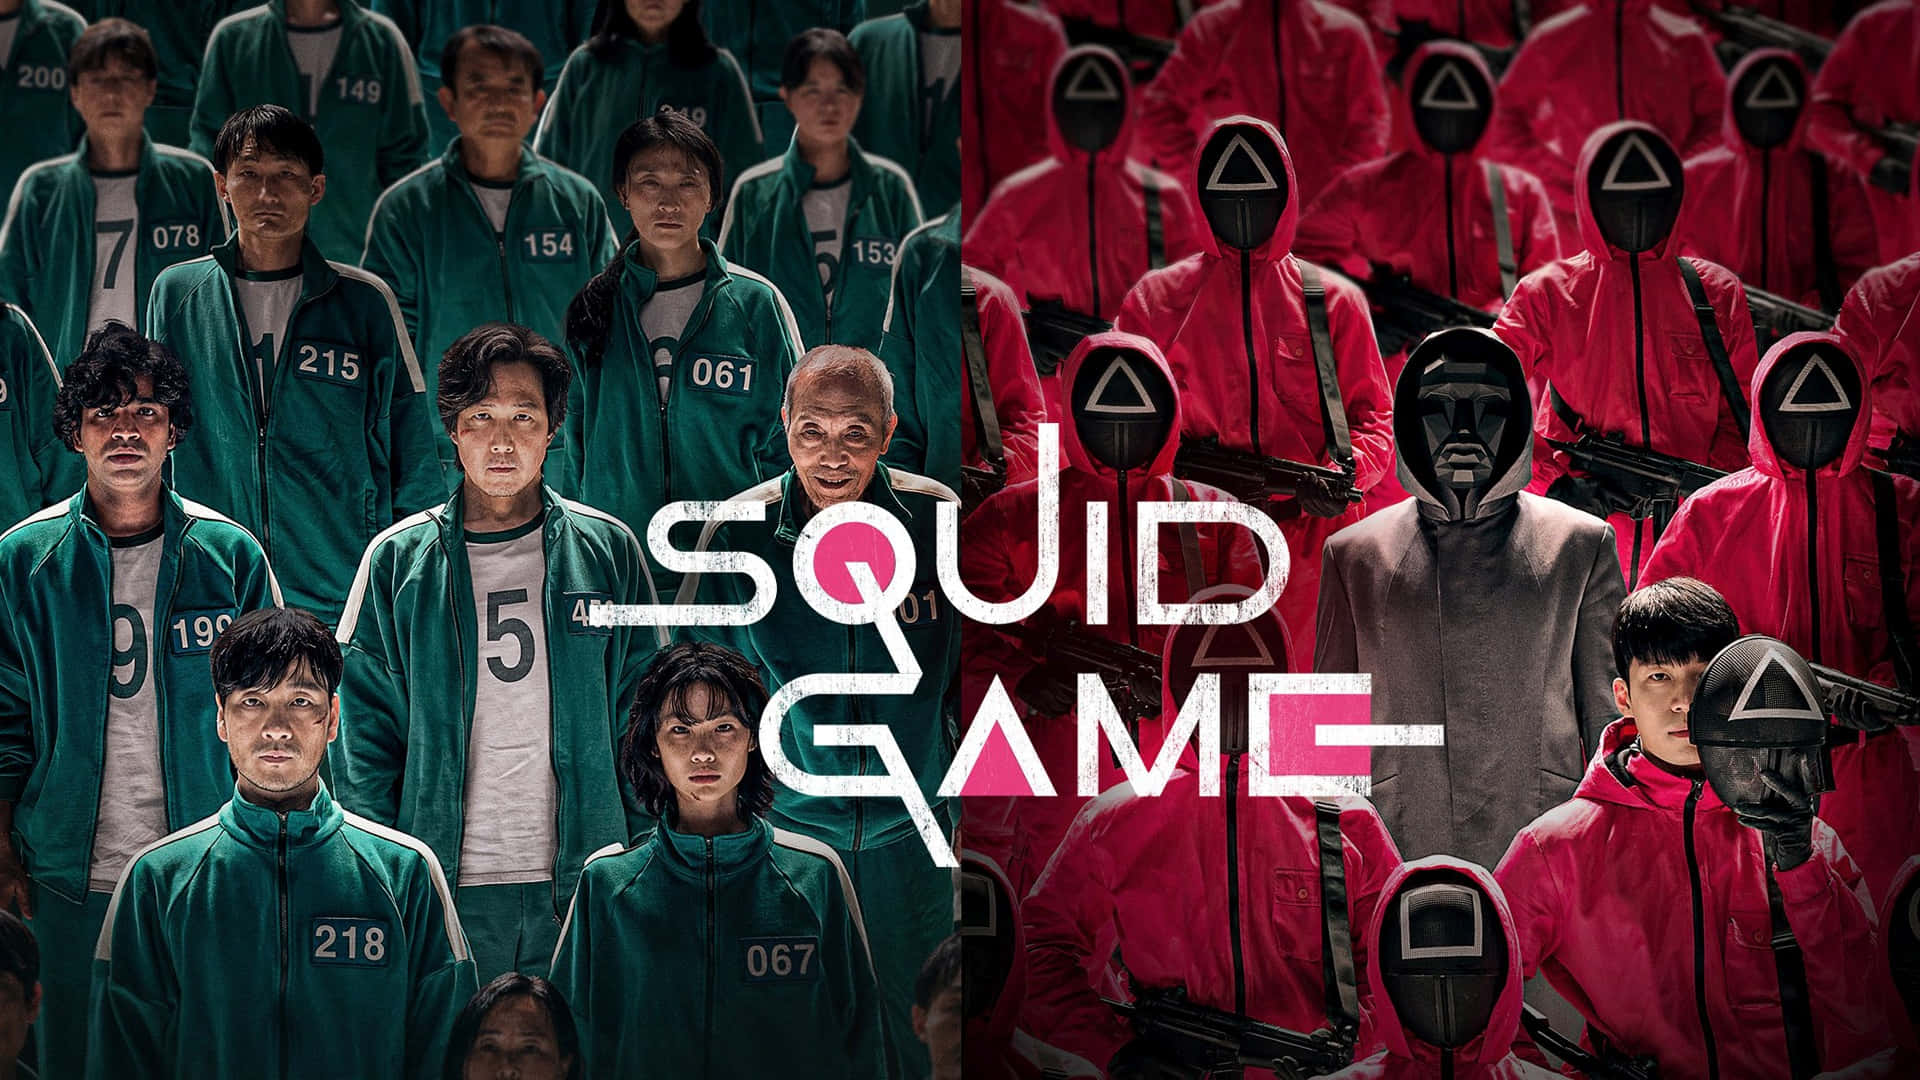 Challenge yourself: Play Squid Game